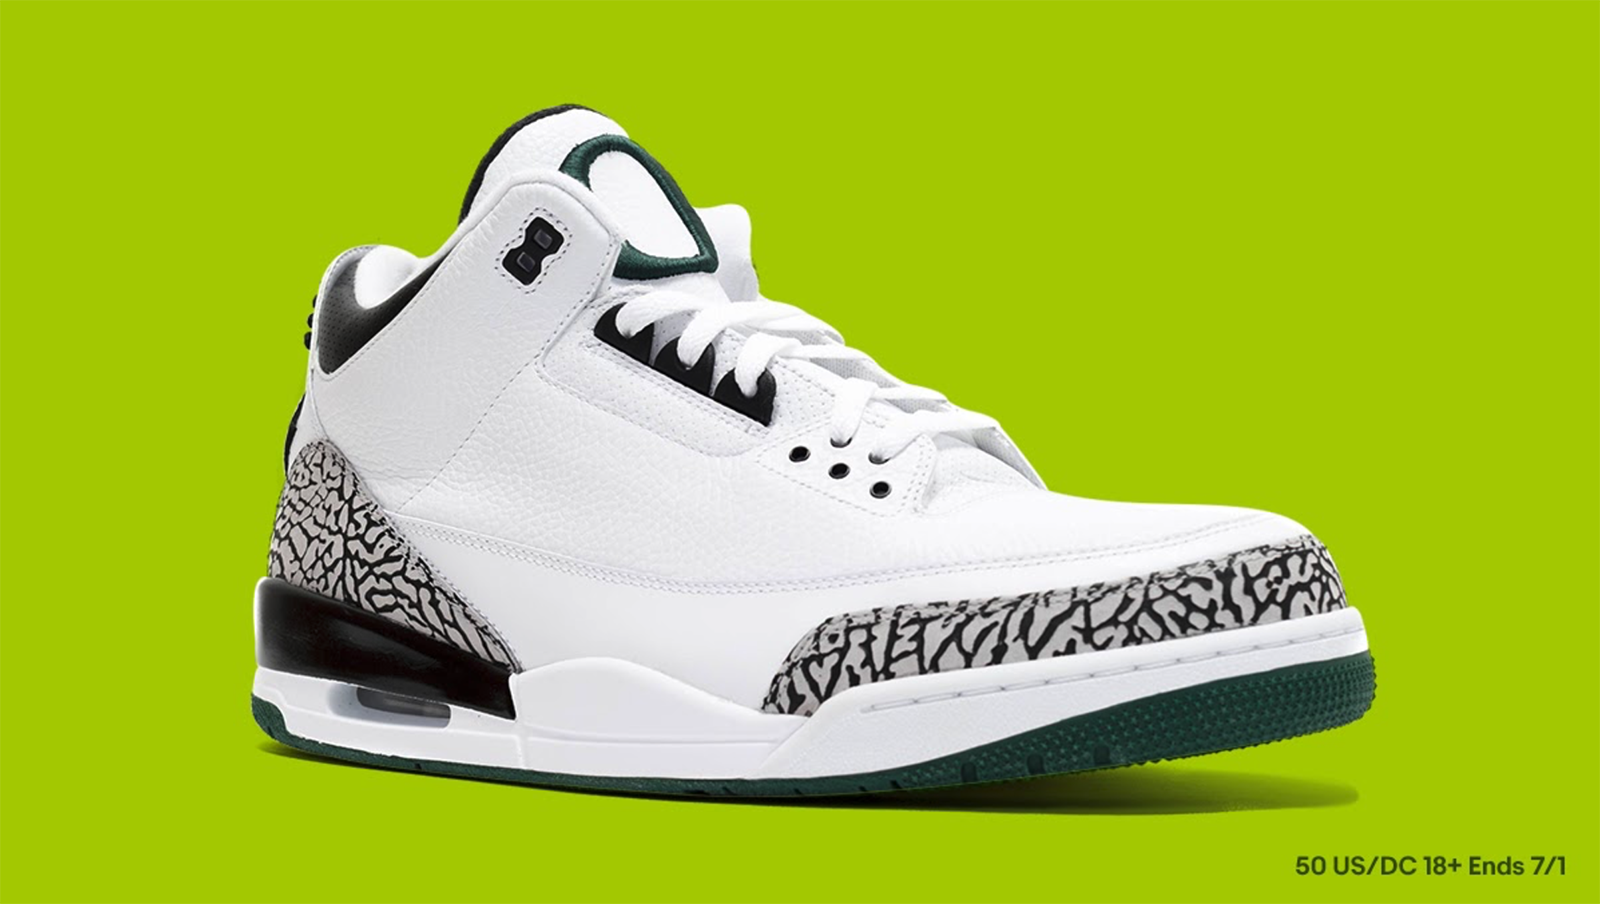 eBay and Sole Supremacy Launch Vault Sale, Air Jordan 3 White Oregon Giveaway